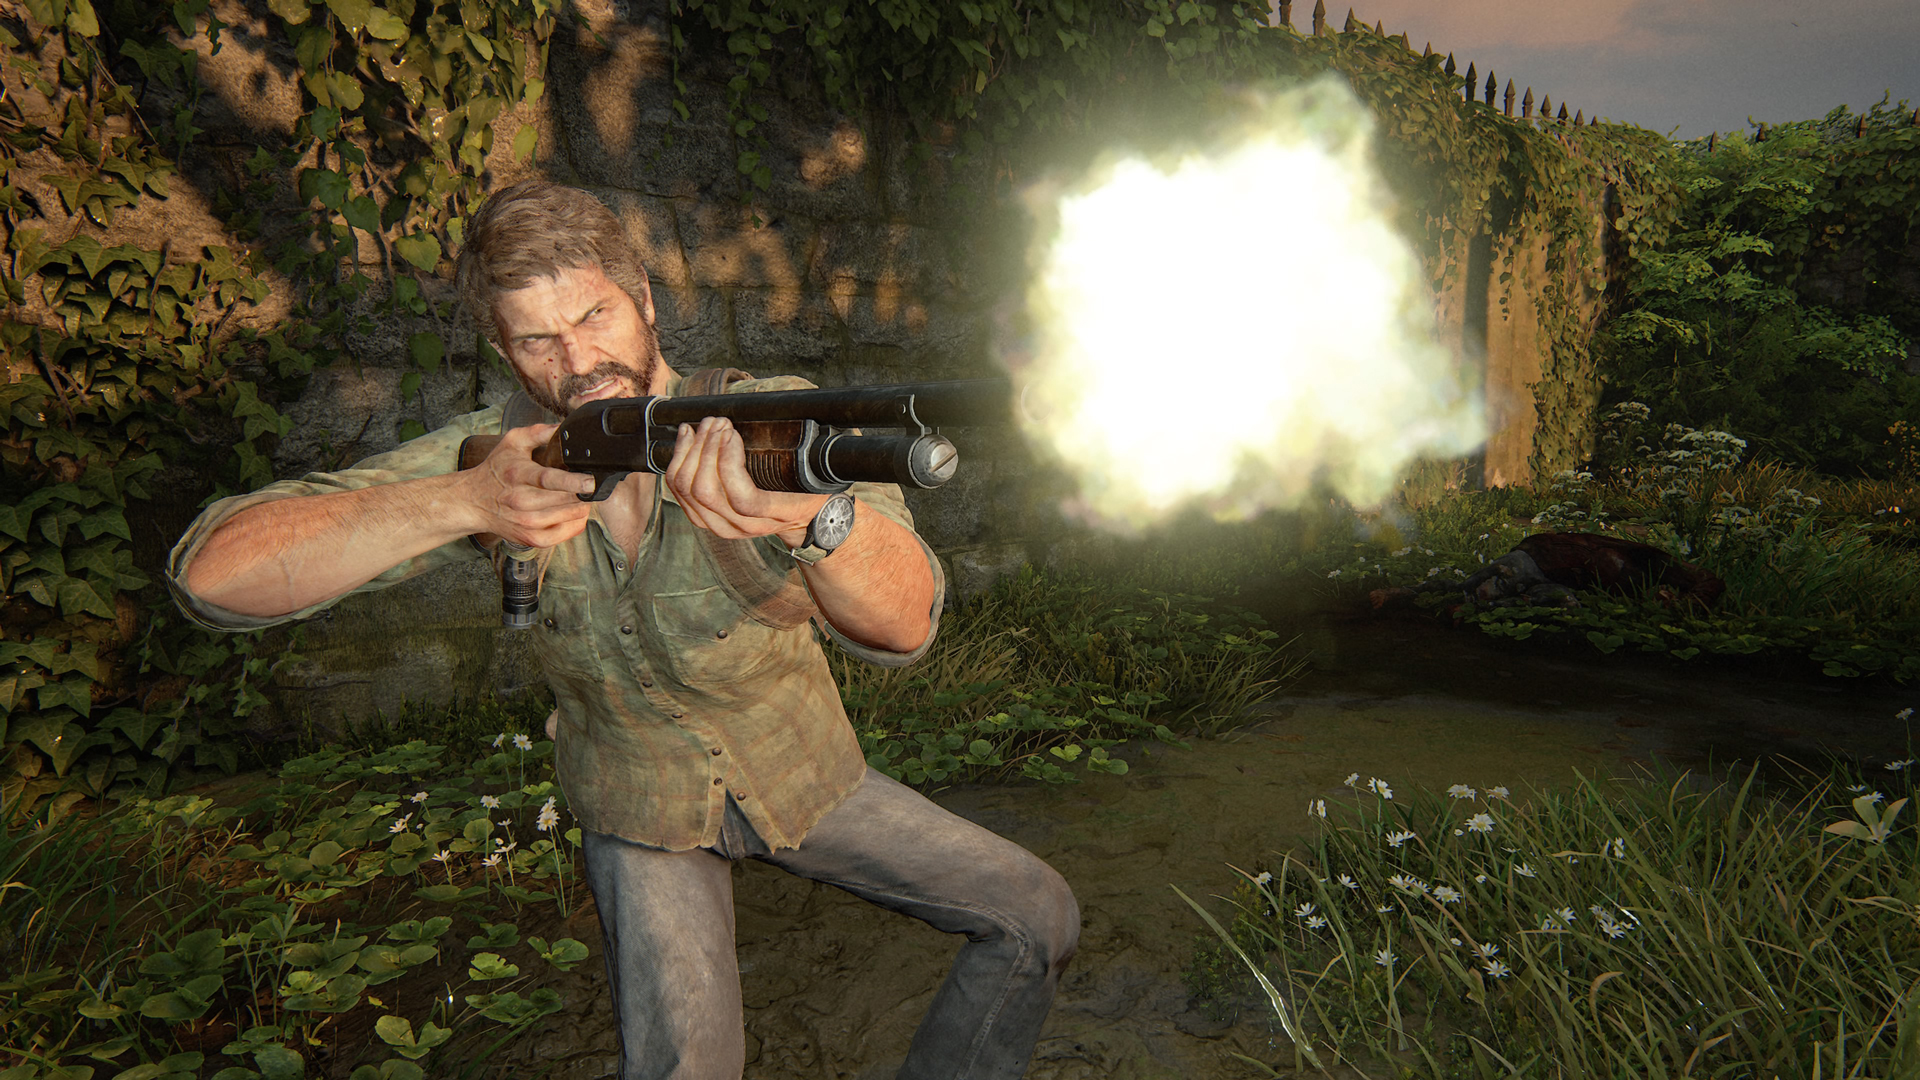 The Last of Us Part 1 patch fixes issues with photo mode and accessibility